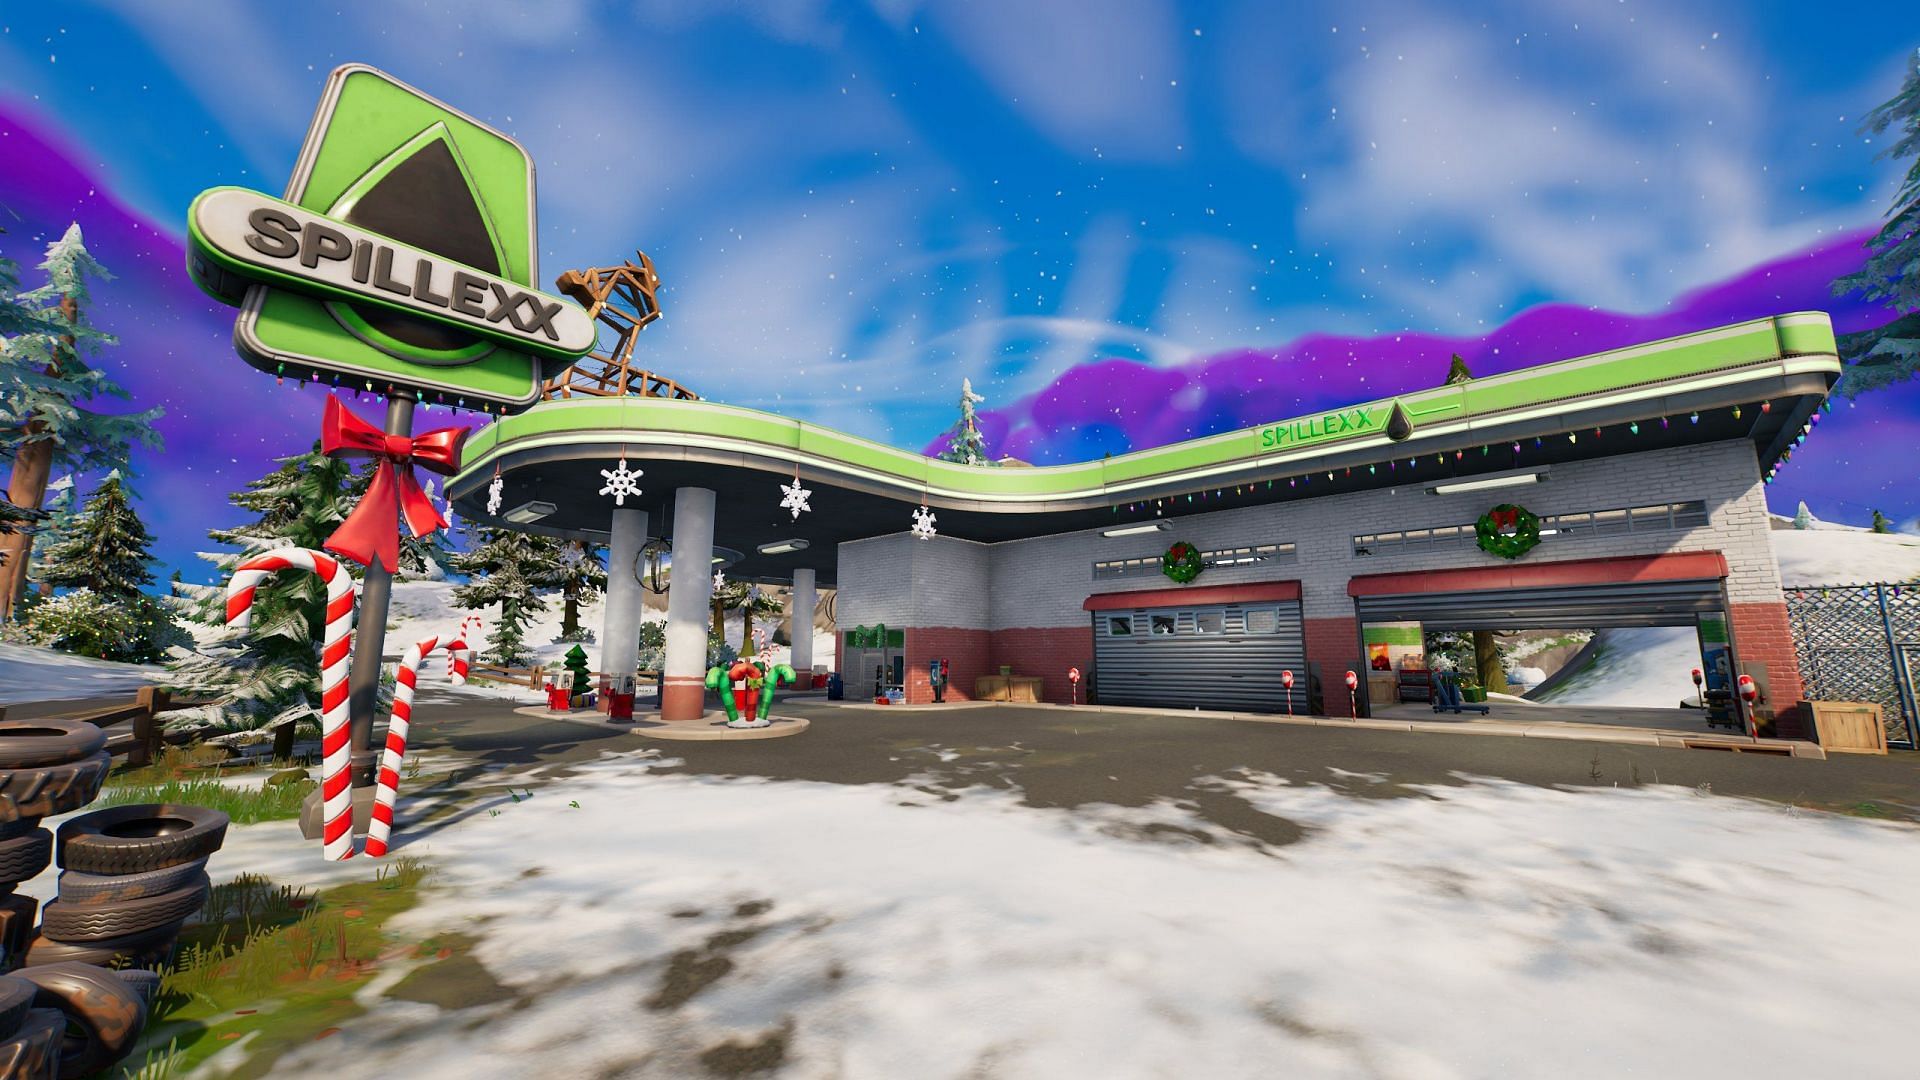 Sgt. Winters Workshop is among the limited time locations during Winterfest 2021 (Image via Epic Games)